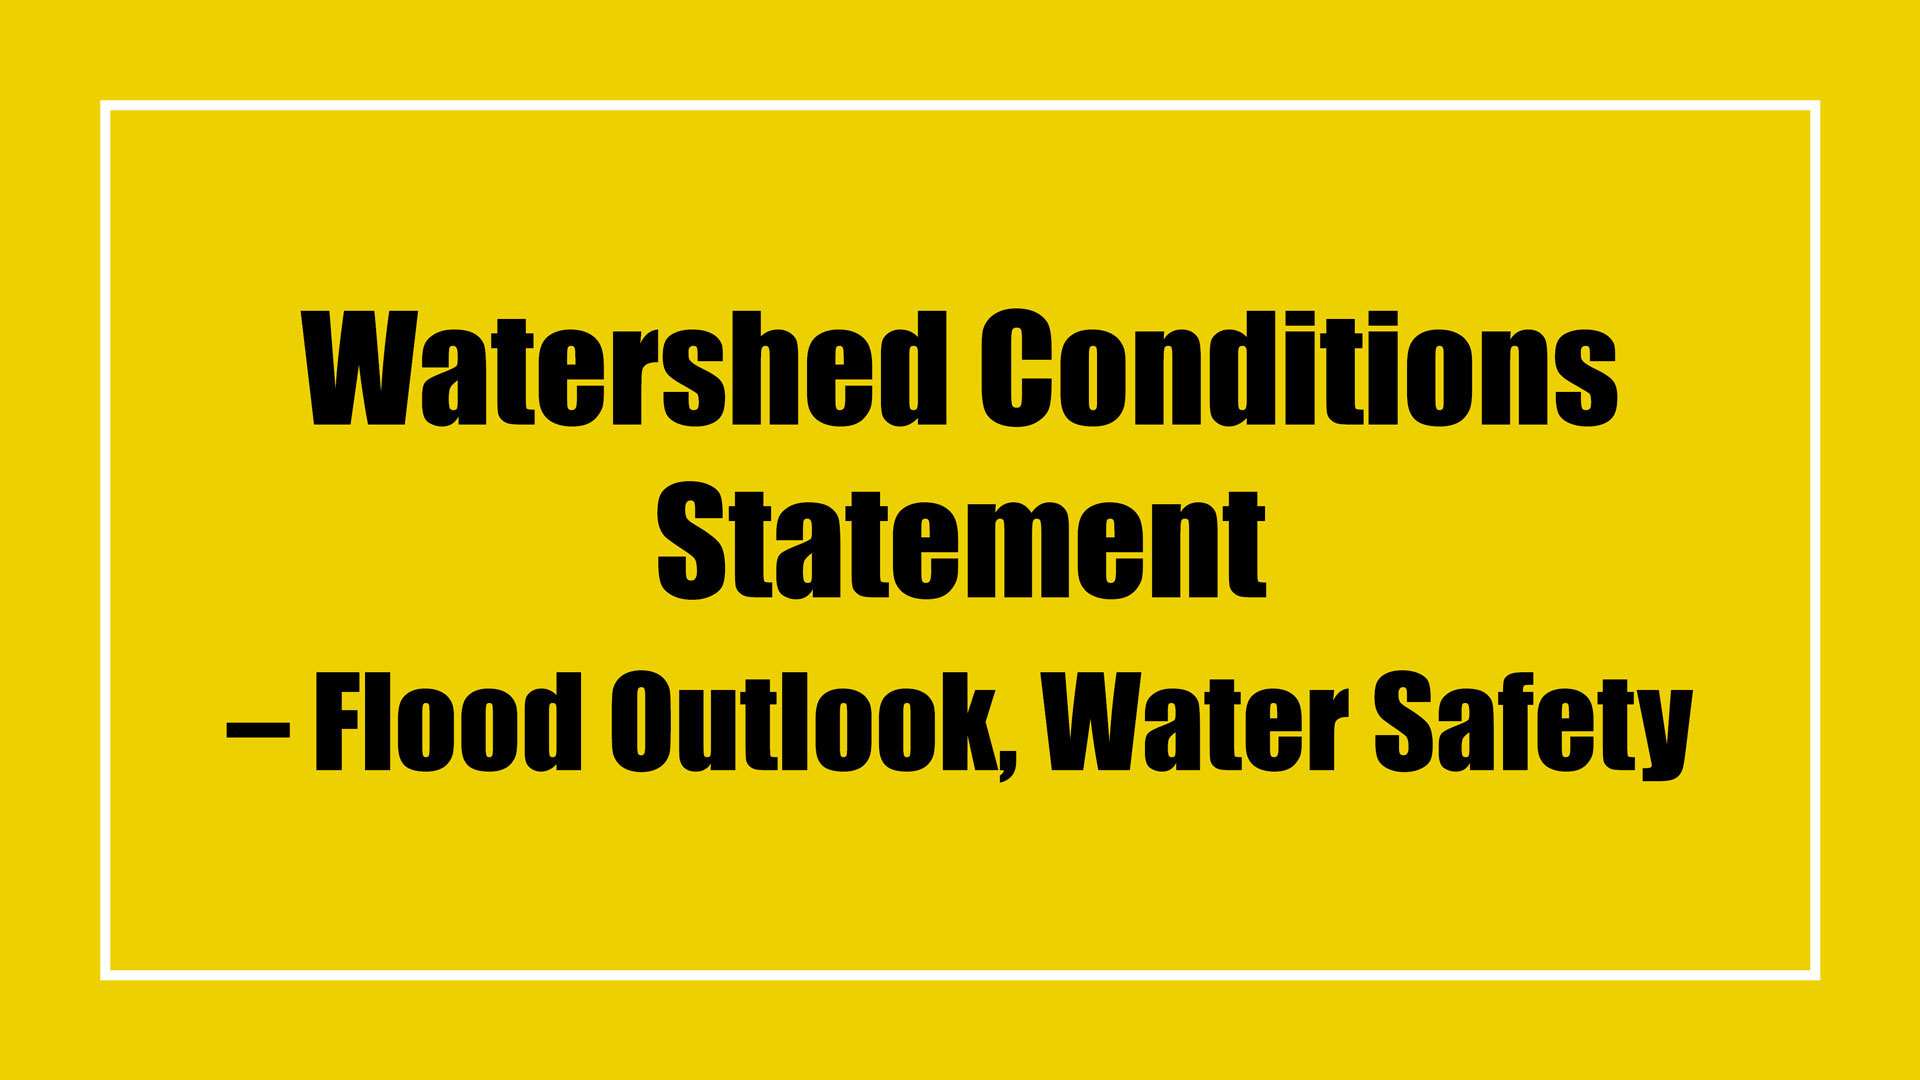 Ausable Bayfield Conservation Authority issued a Watershed Conditions Statement – Flood Outlook and Water Safety flood message